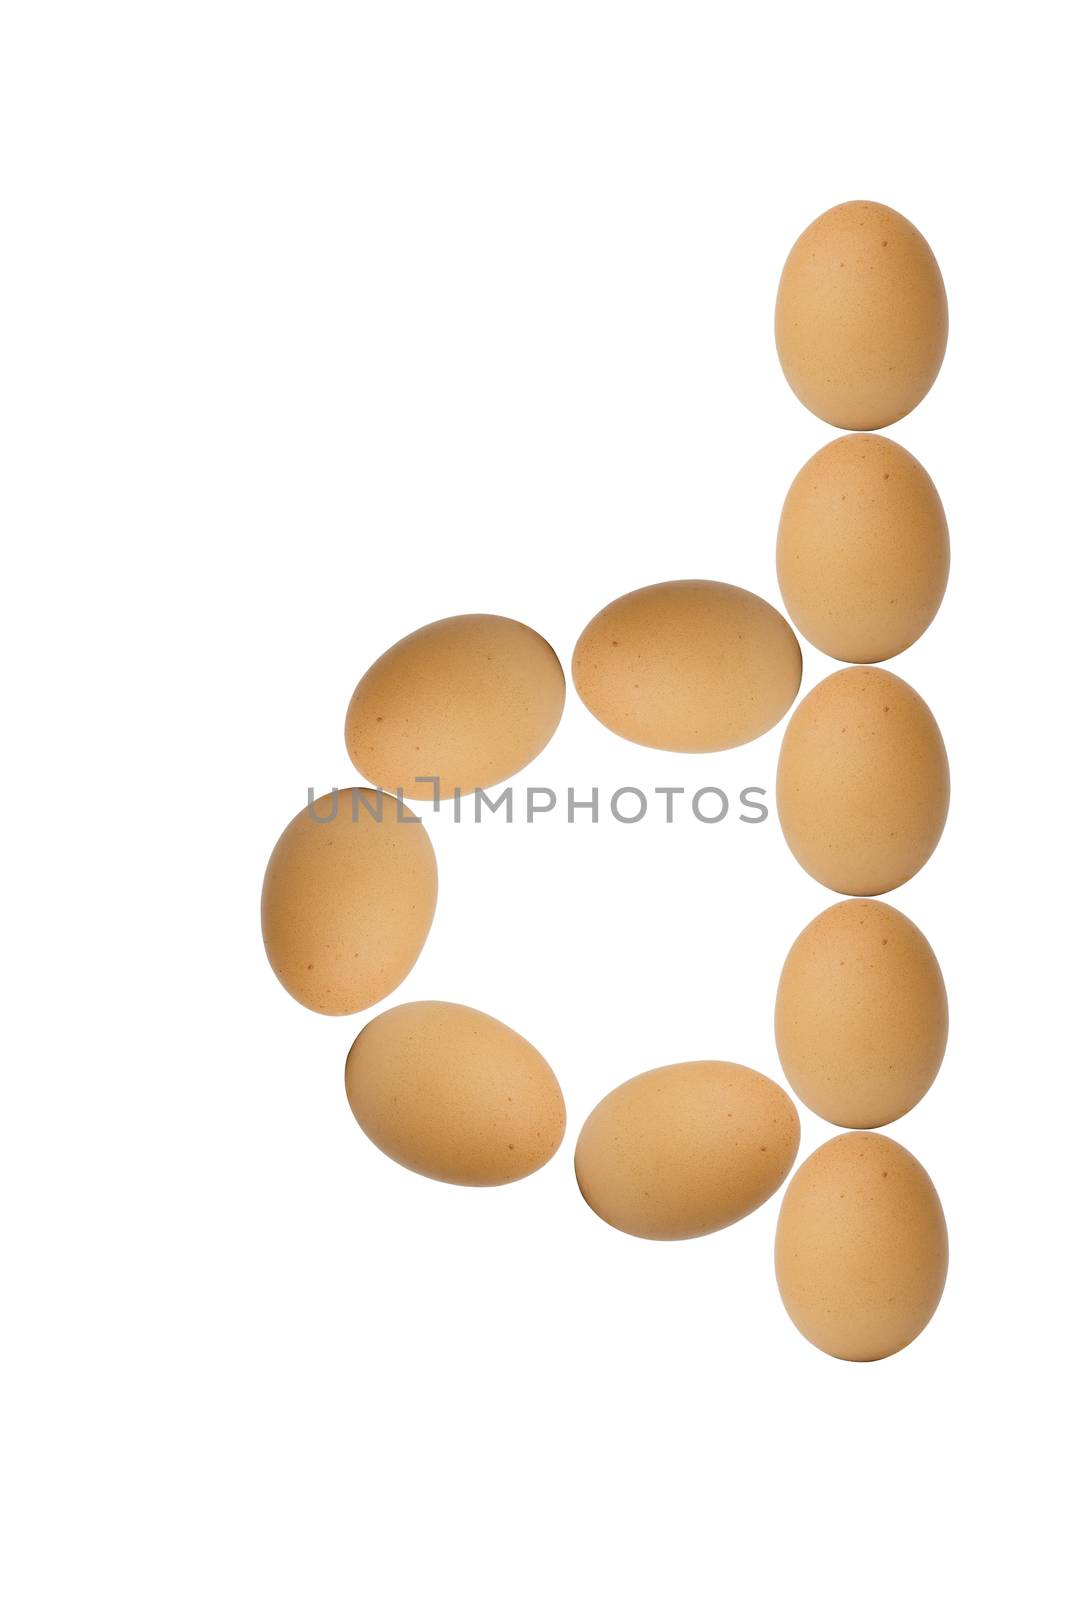 Alphabets  A to Z from brown eggs alphabet isolated on white background, d